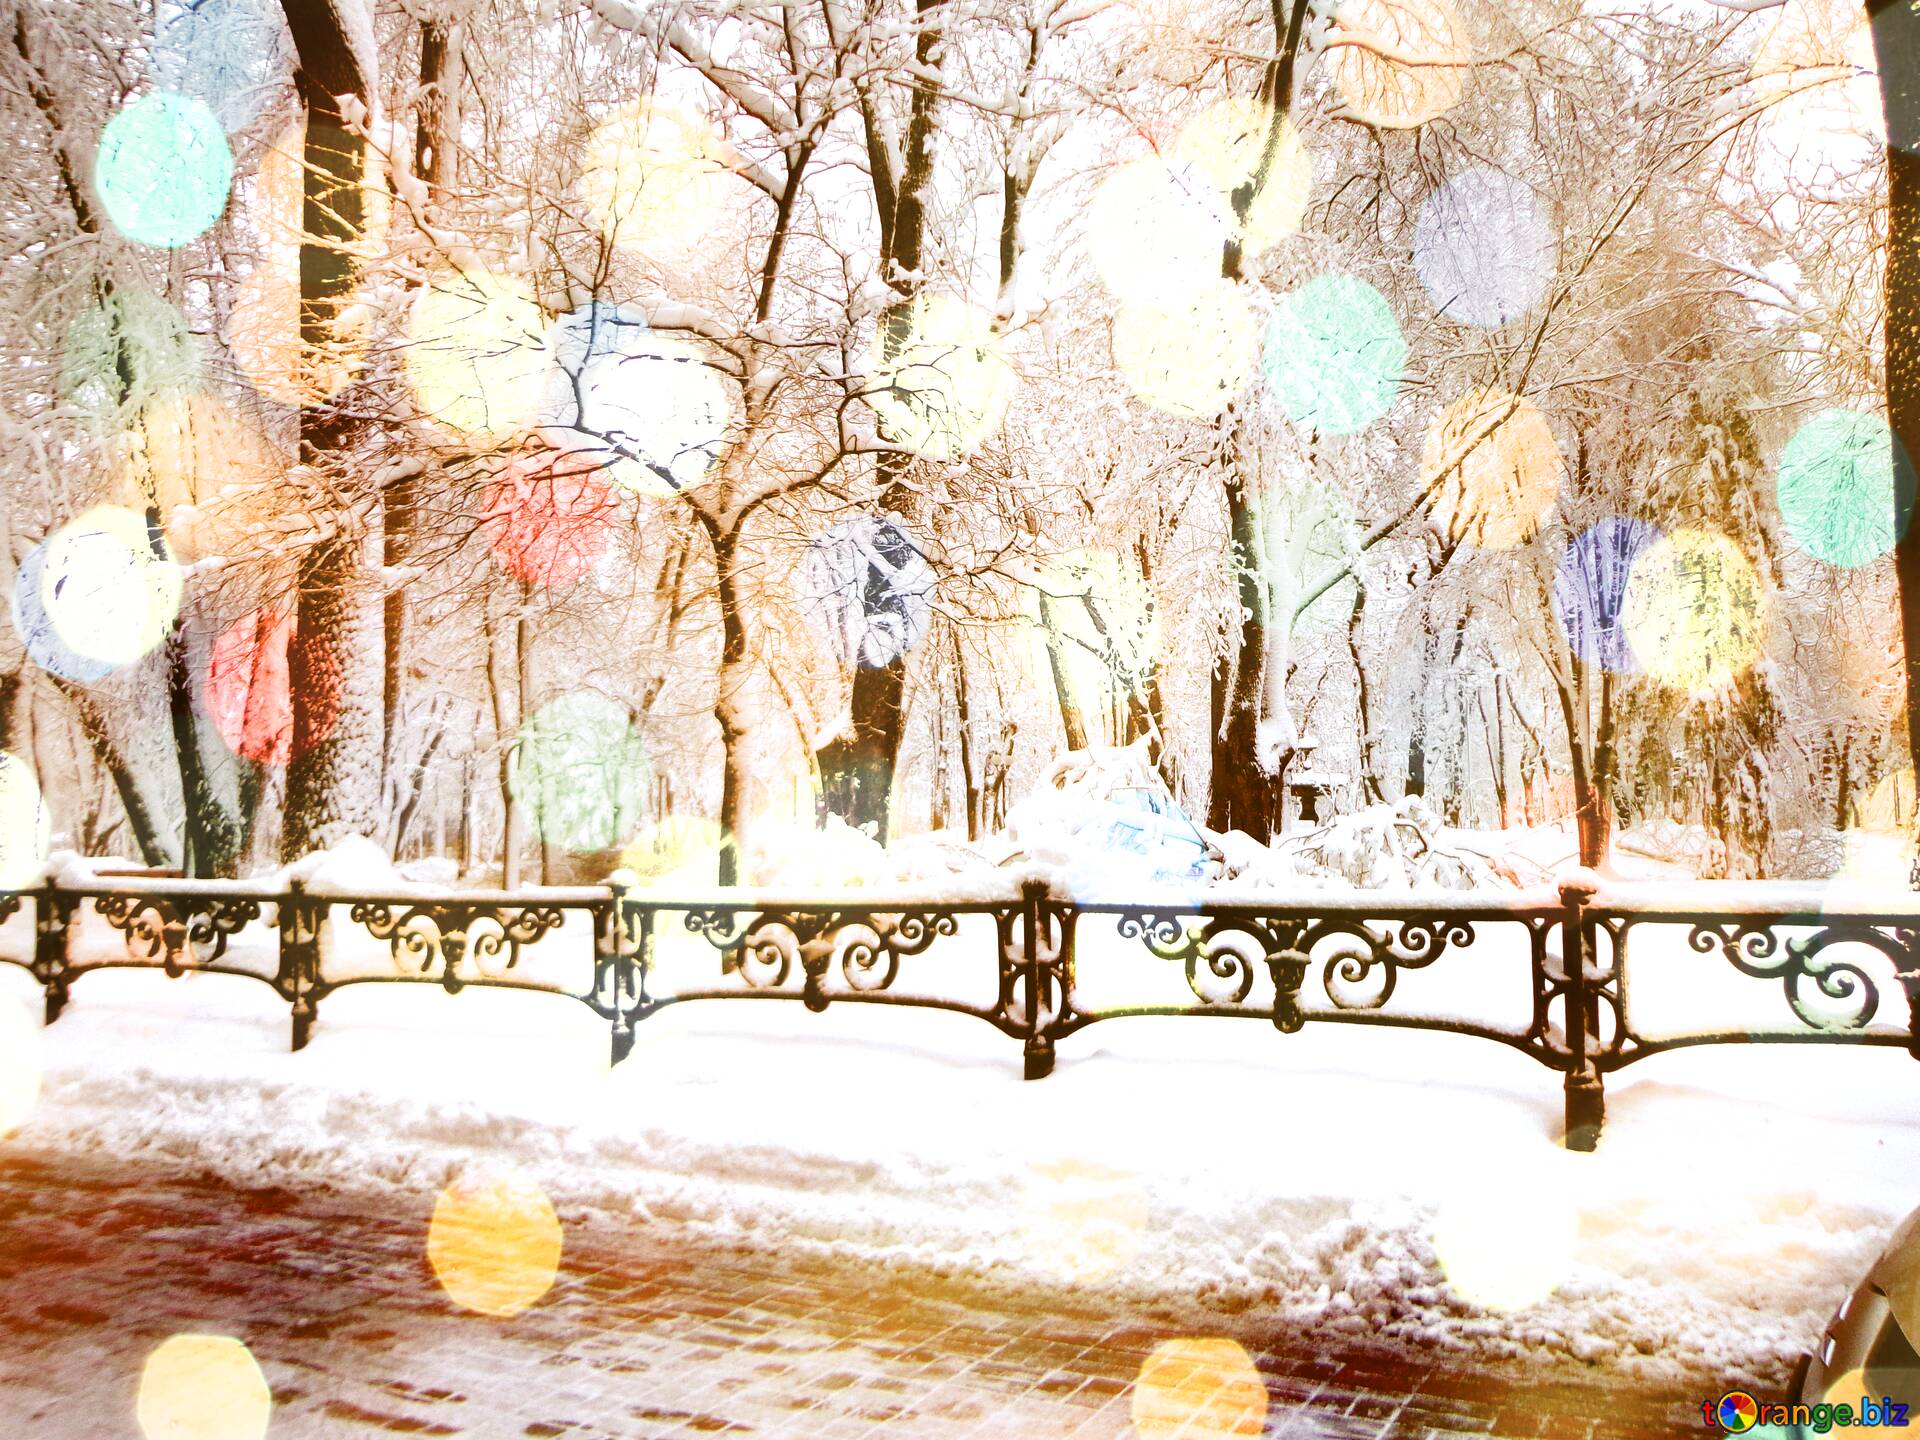 Download free picture Snow City Park winter lights backgrounds on CC